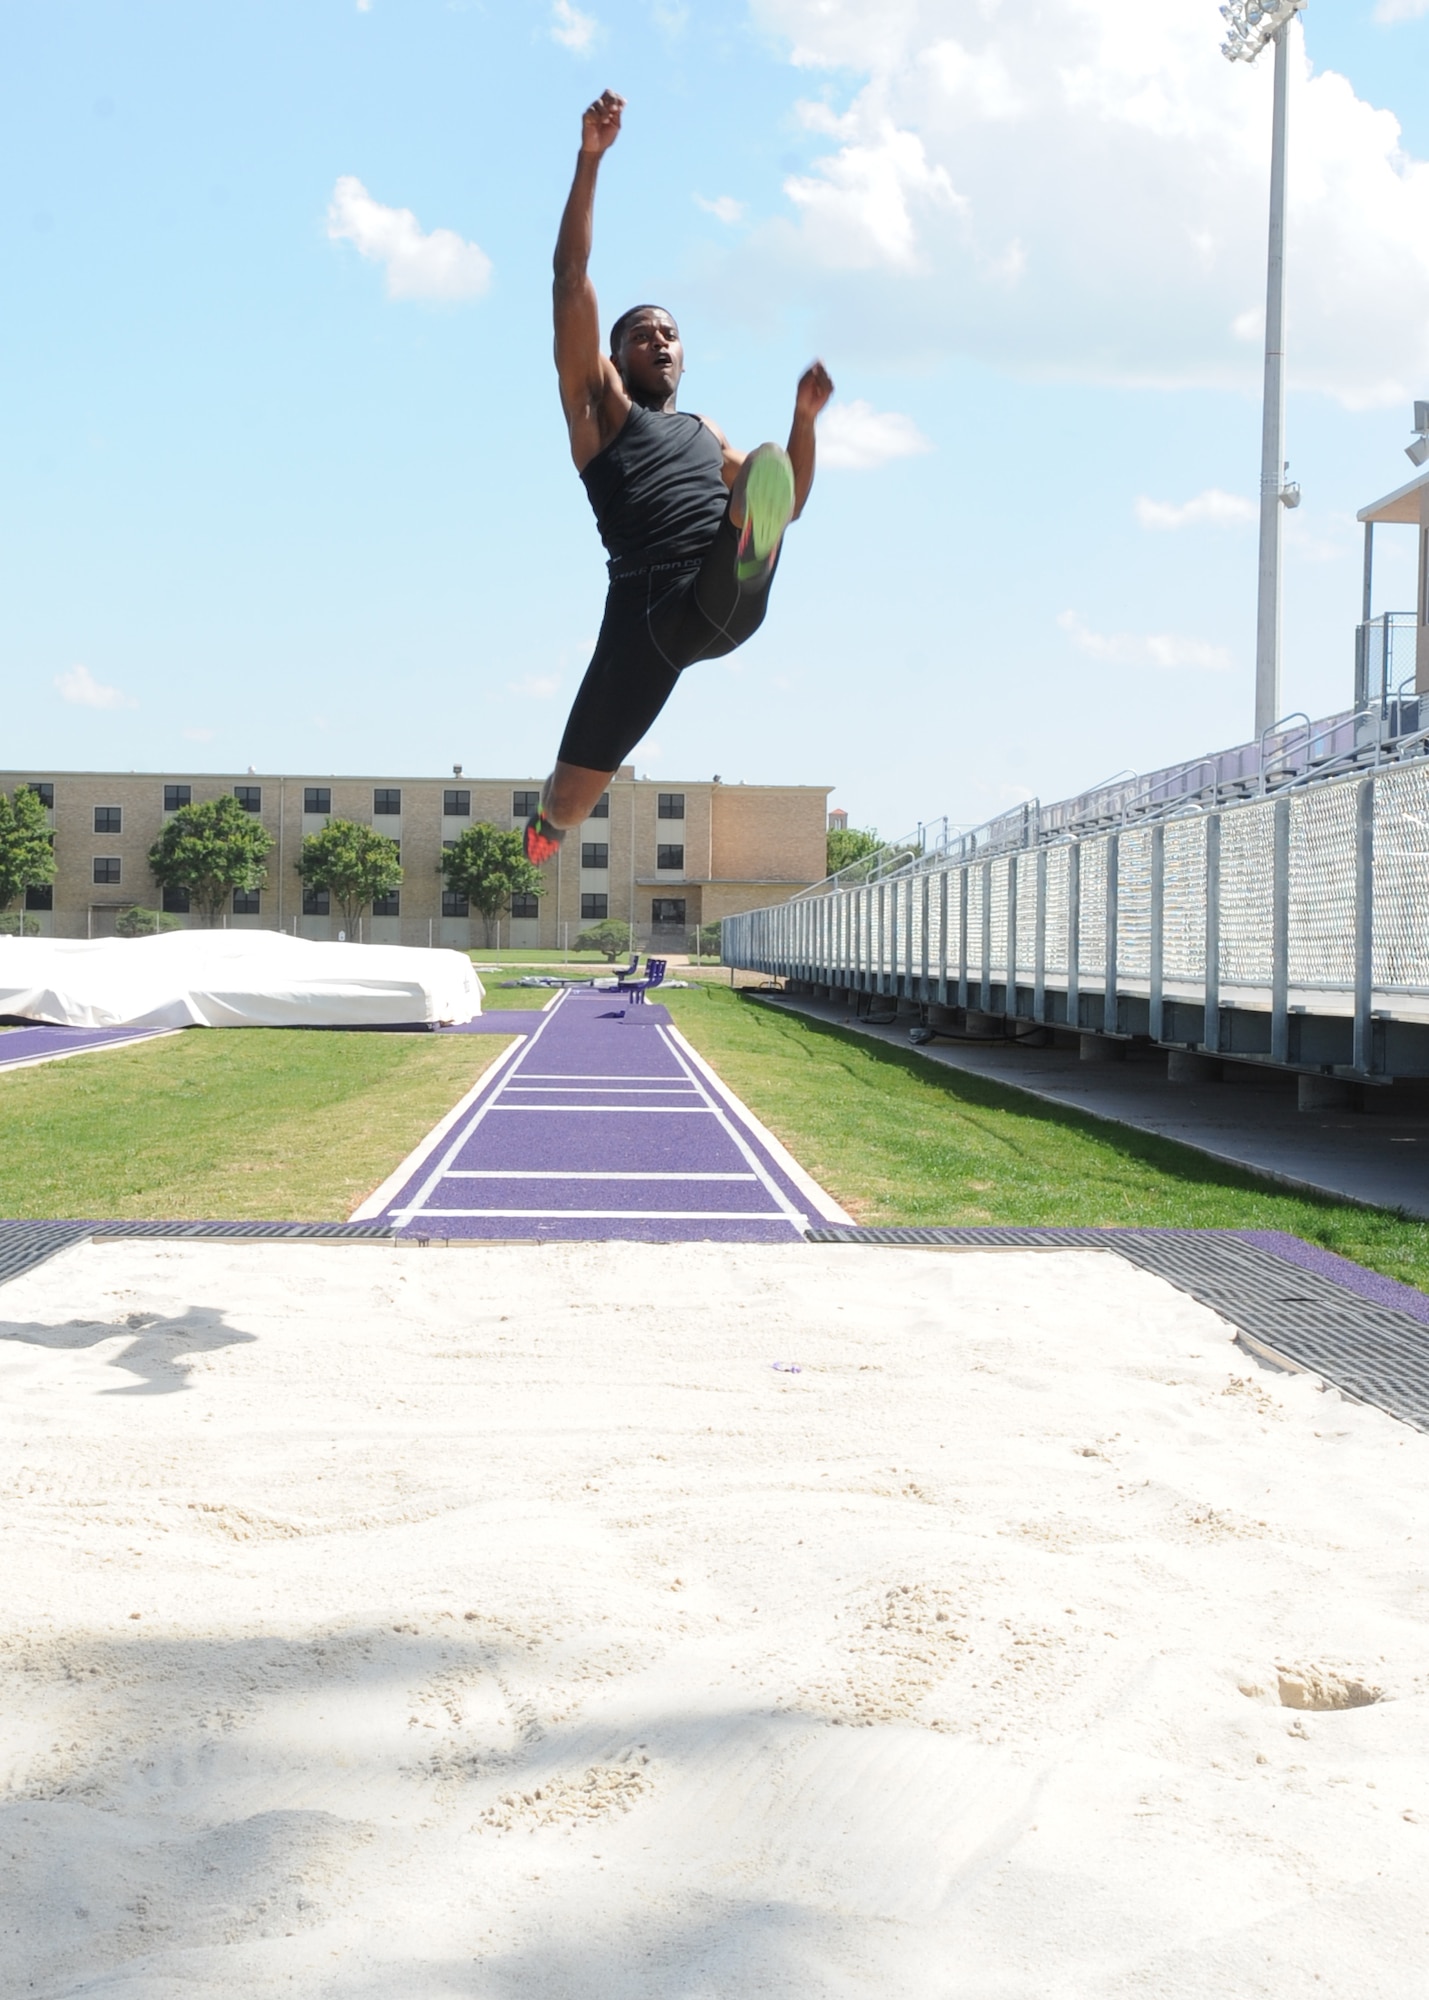 U.S. Air Force Senior Airman Parnelle Shands, 317th Aircraft Maintenance Squadron crew chief, practices his long jump at Abilene Christian University May 18, 2015, in Abilene, Texas. Shands competed in long jump at the 2015 Headquarter Air Command Track and Field Championship and won 1st place. (U.S. Air Force photo by Senior Airman Shannon Hall/Released)